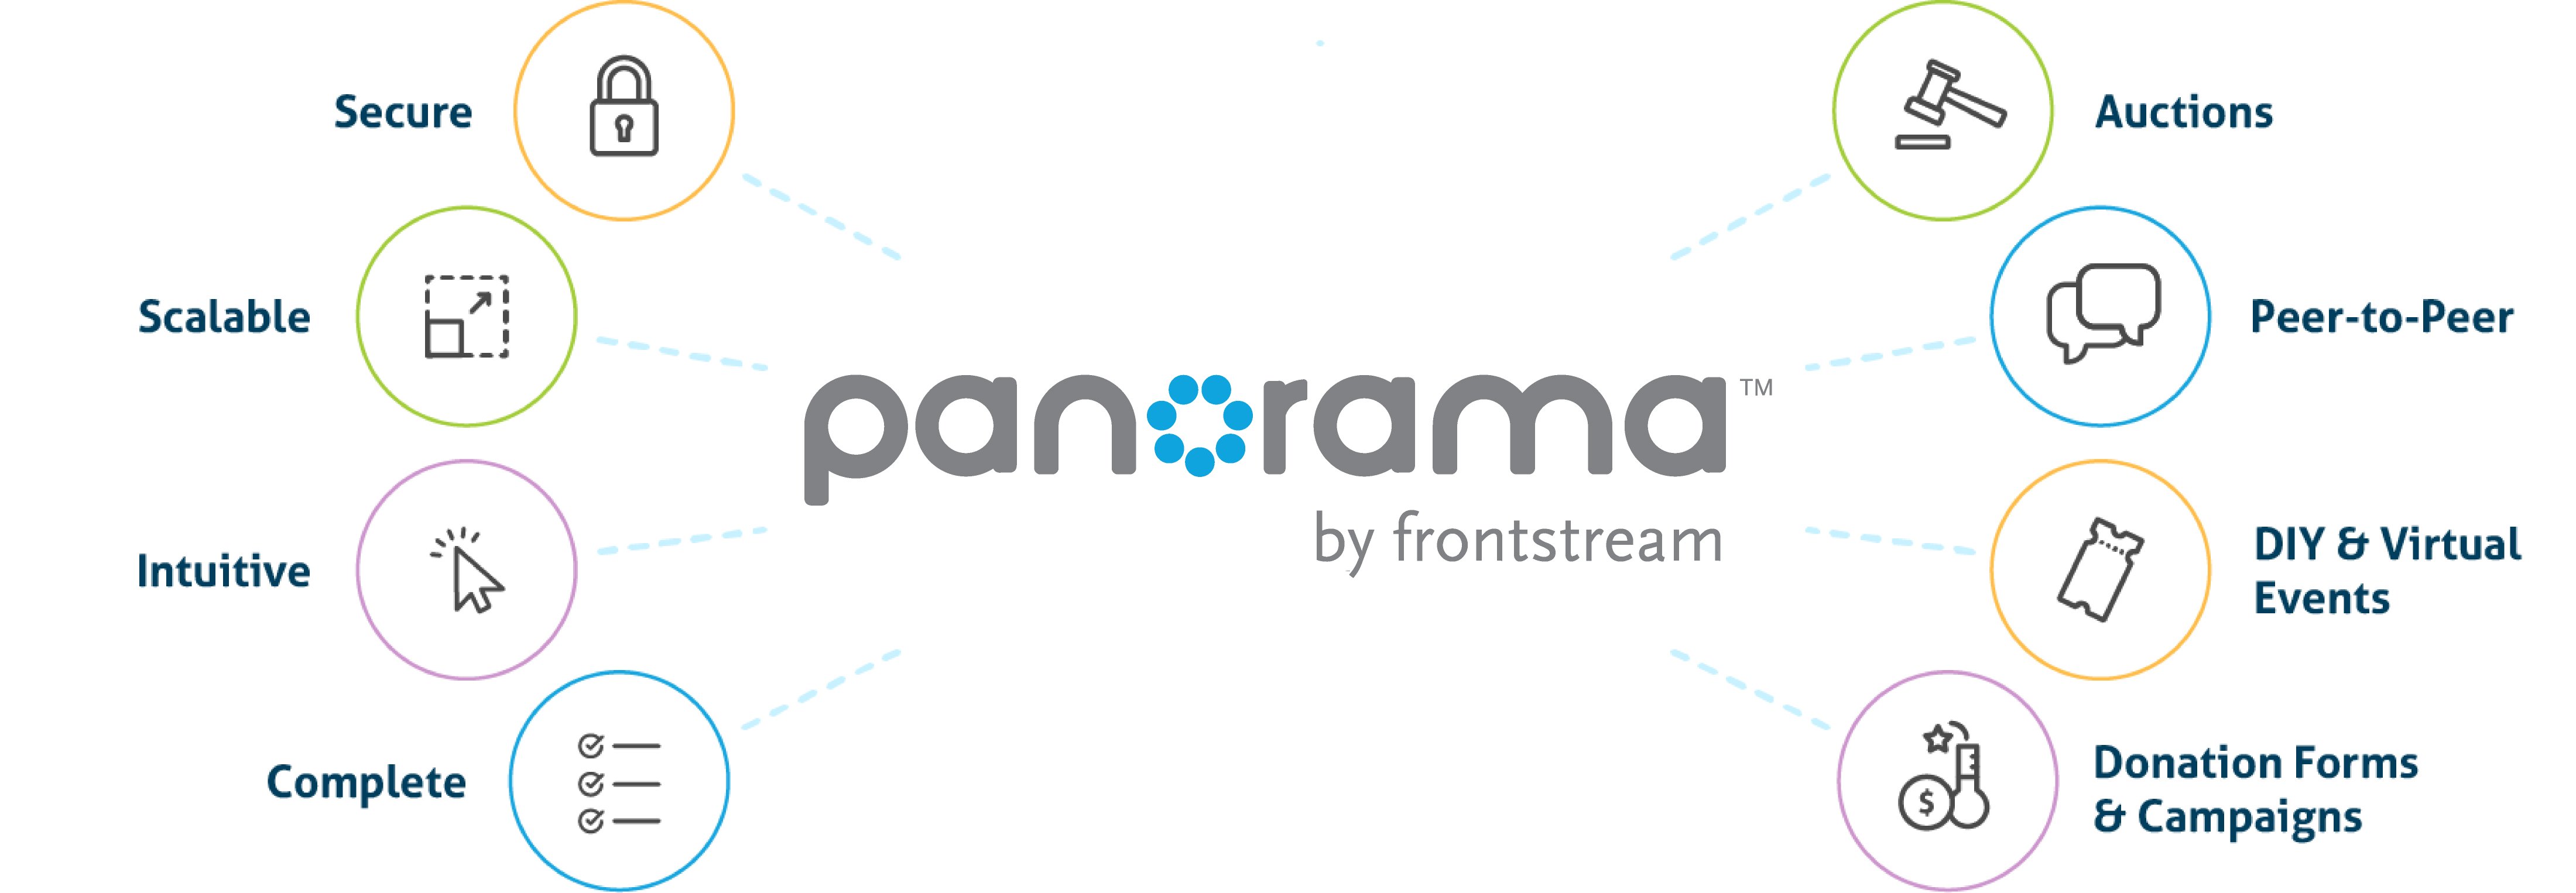 benefits-of-panorama-by-frontstream